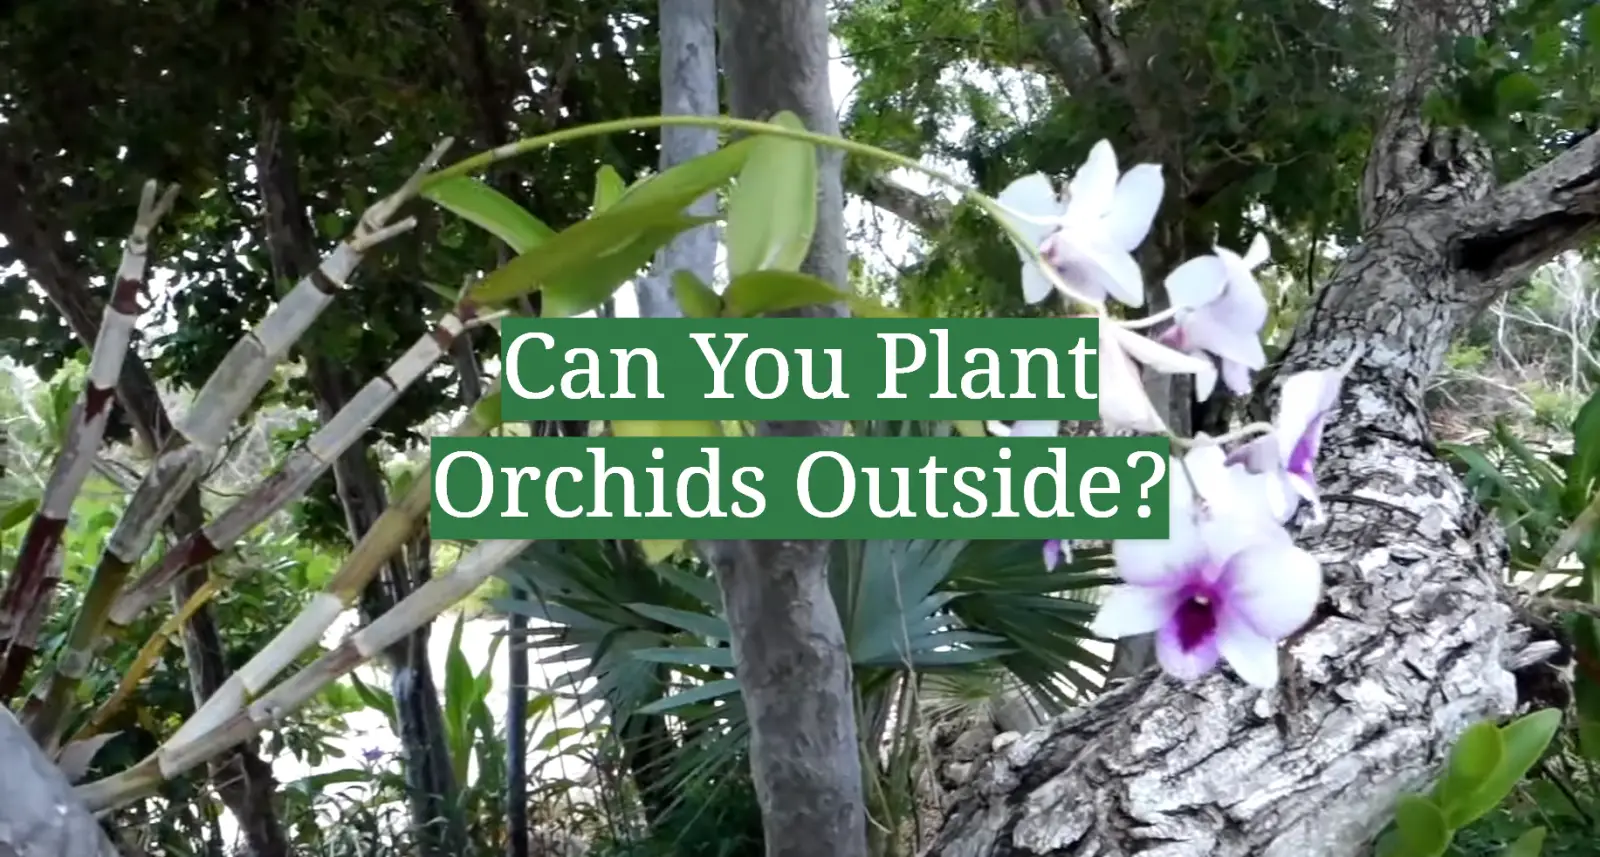 Can You Plant Orchids Outside?